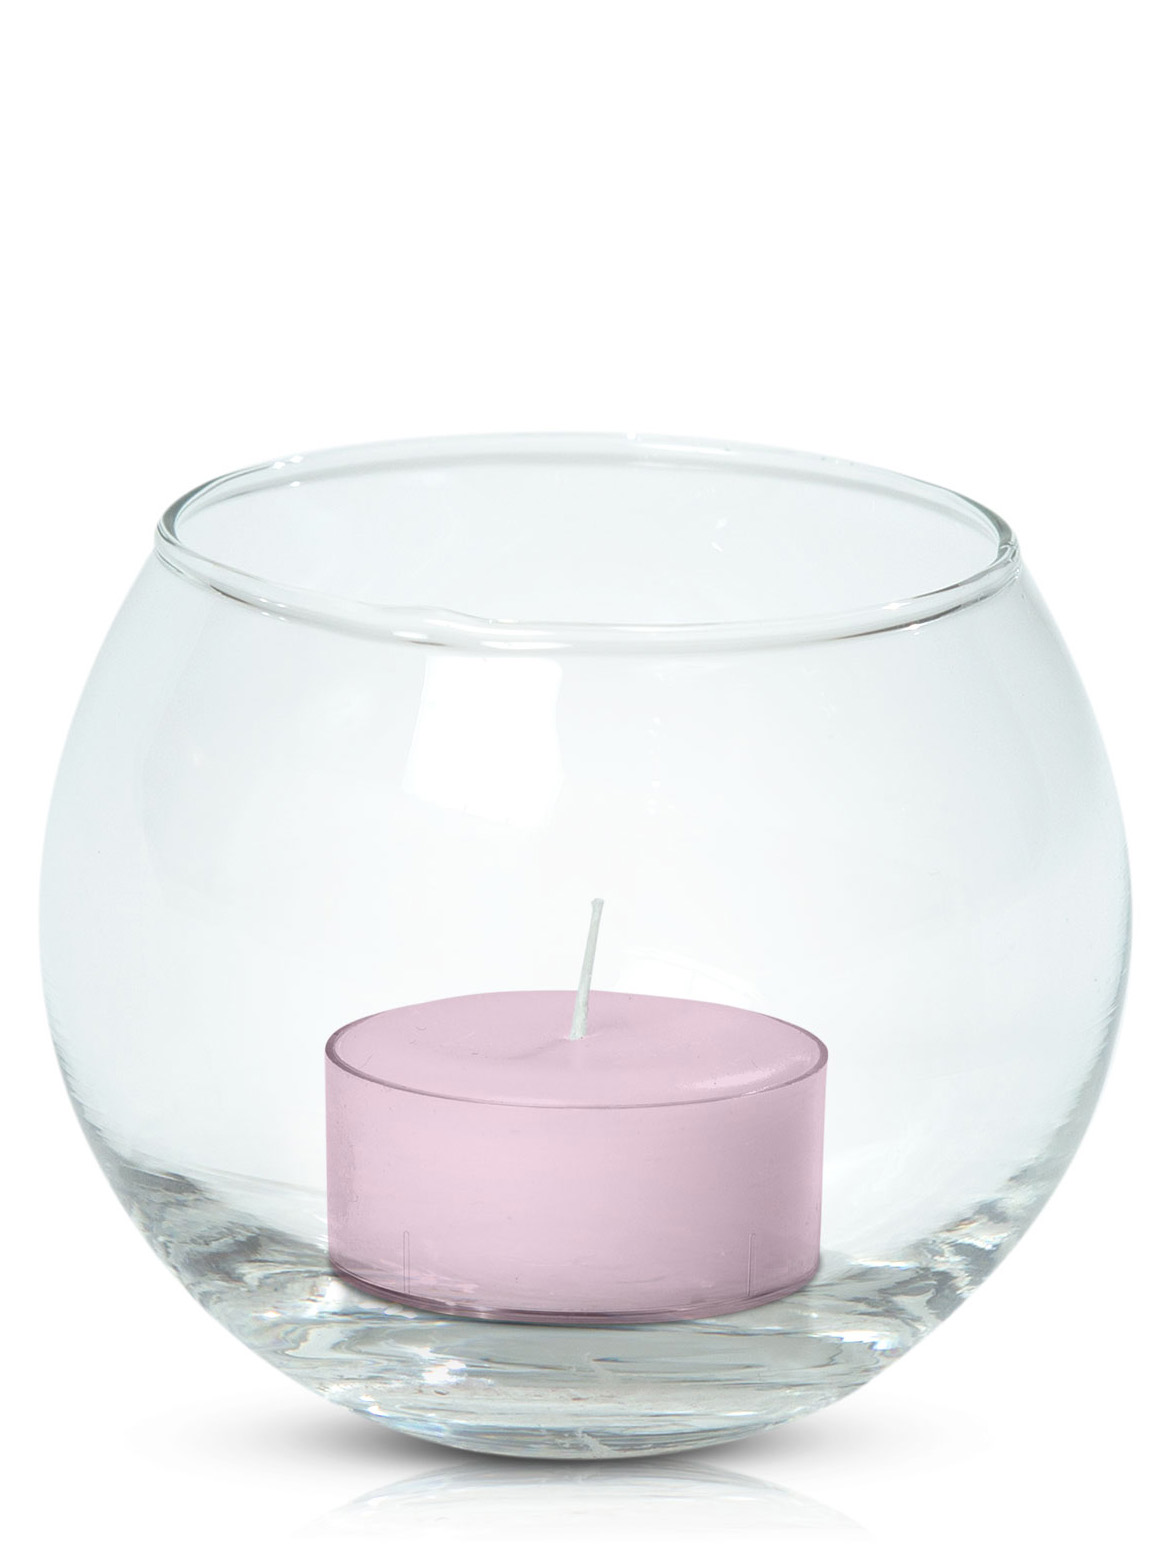 Pastel Pink Tealight in Fishbowl, Pack of 24